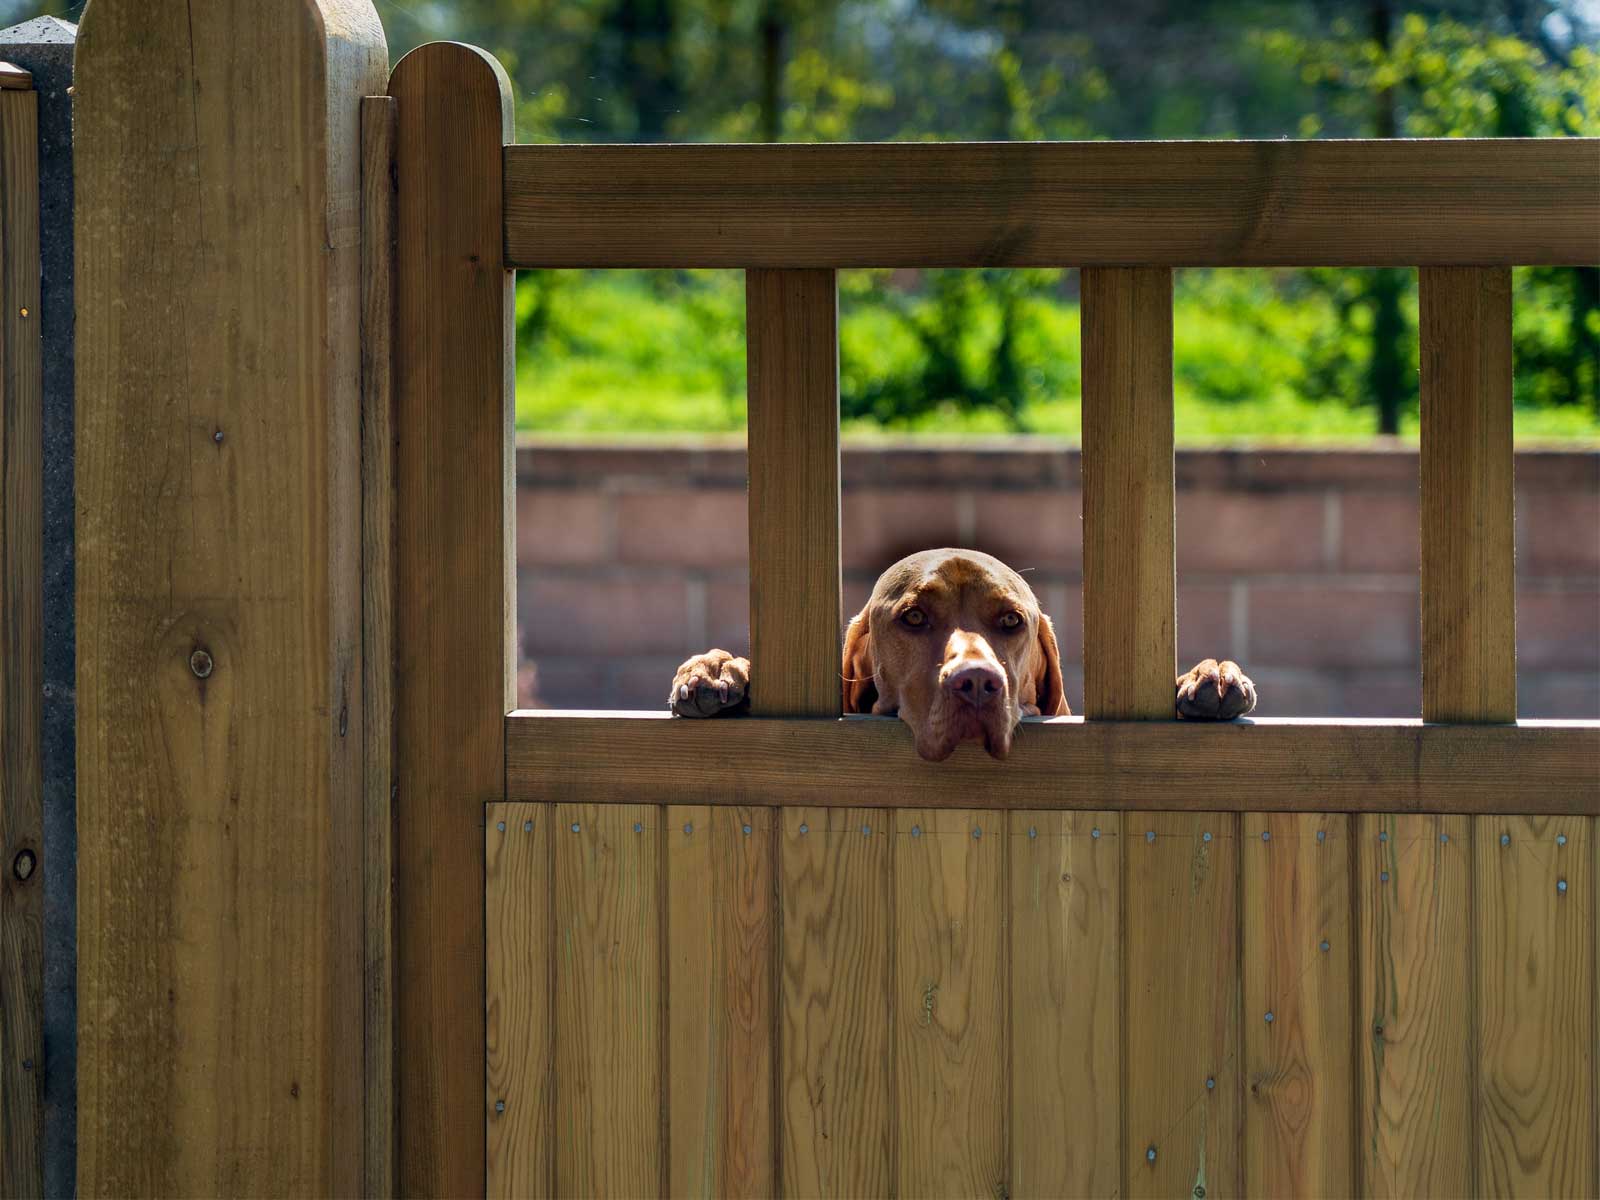 A brown dog looking through a fence